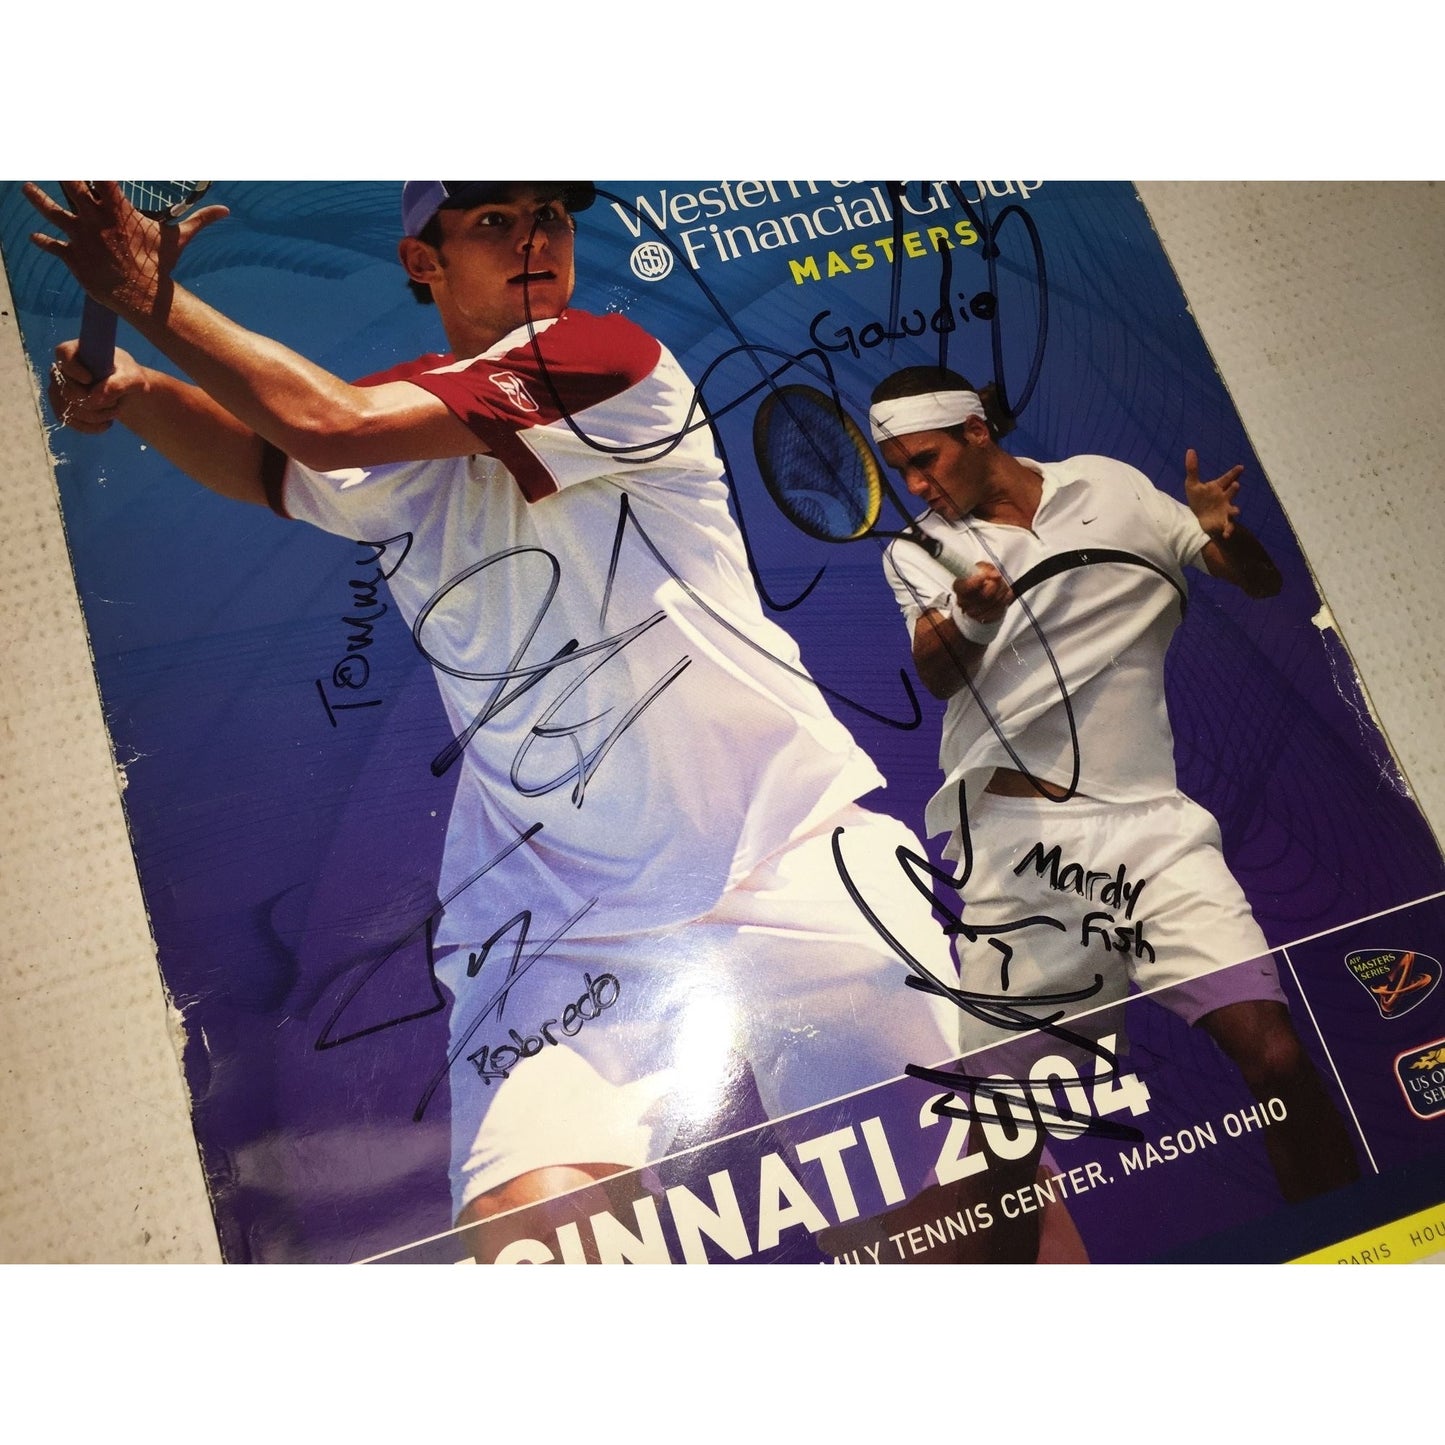 Vintage 2004 Western & Southern Financial Group Masters Tennis Autographed Tournament Program